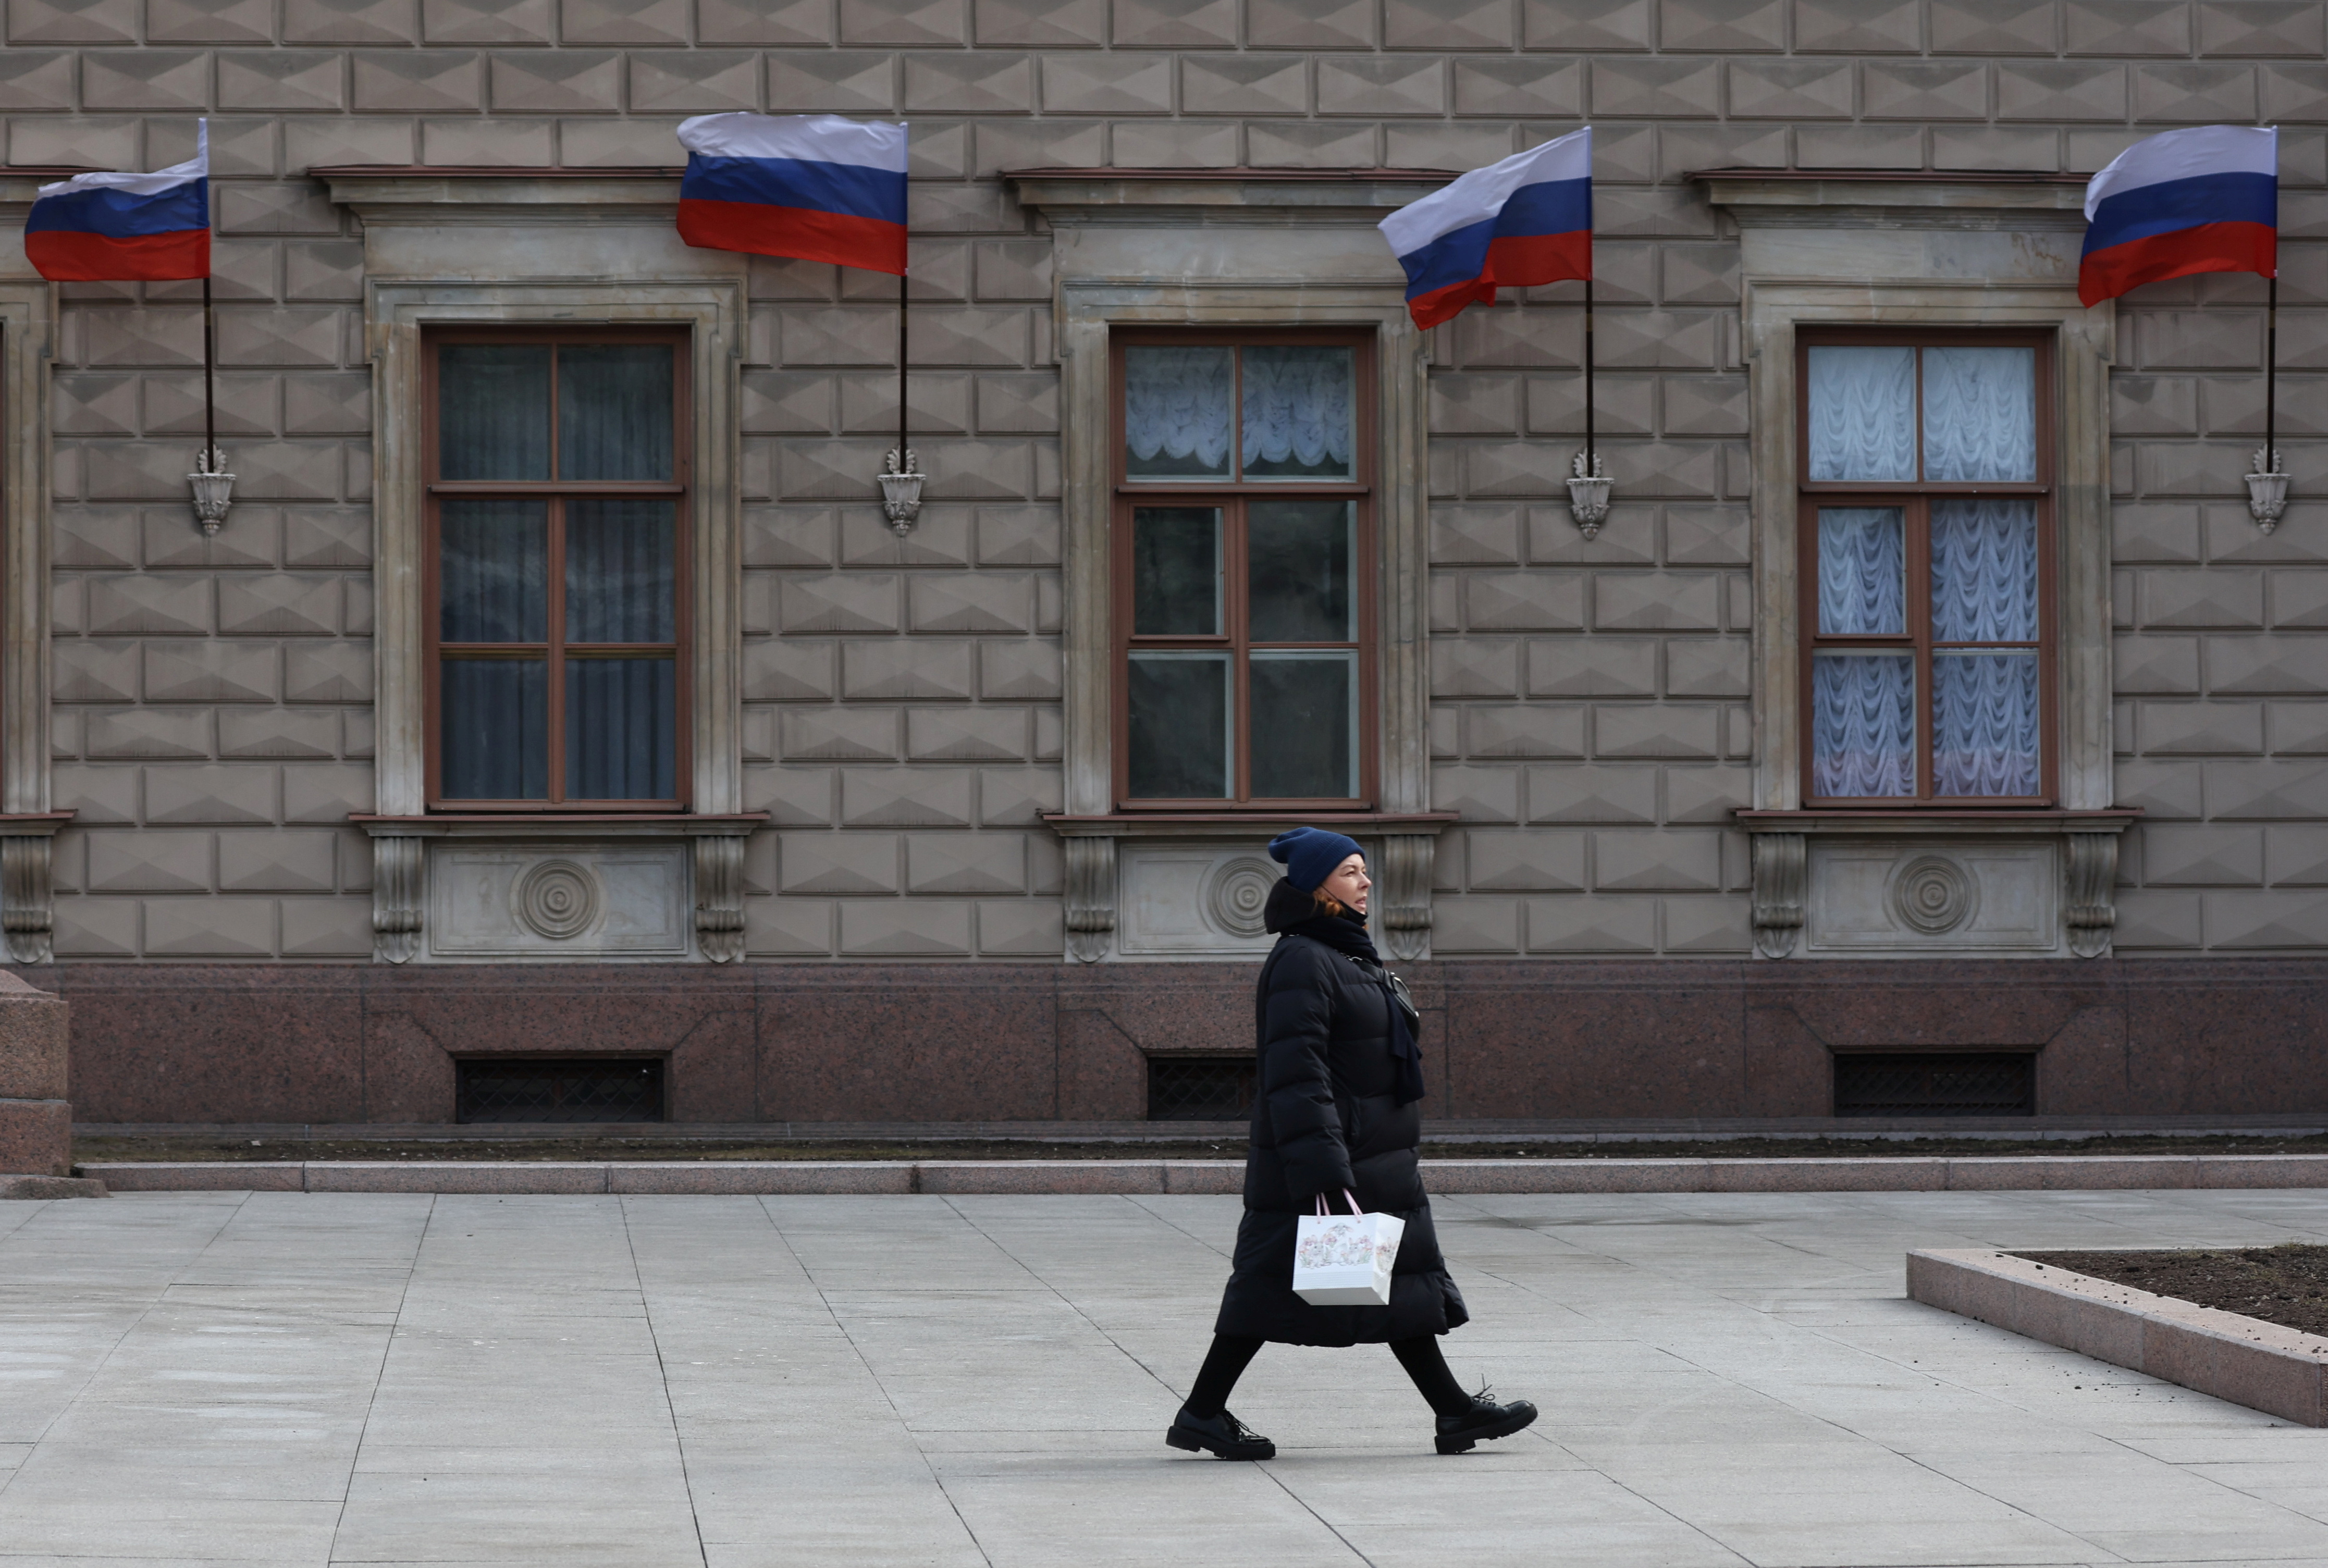 A woman walks past a building with Russian flags placed on its wall in Saint Petersburg